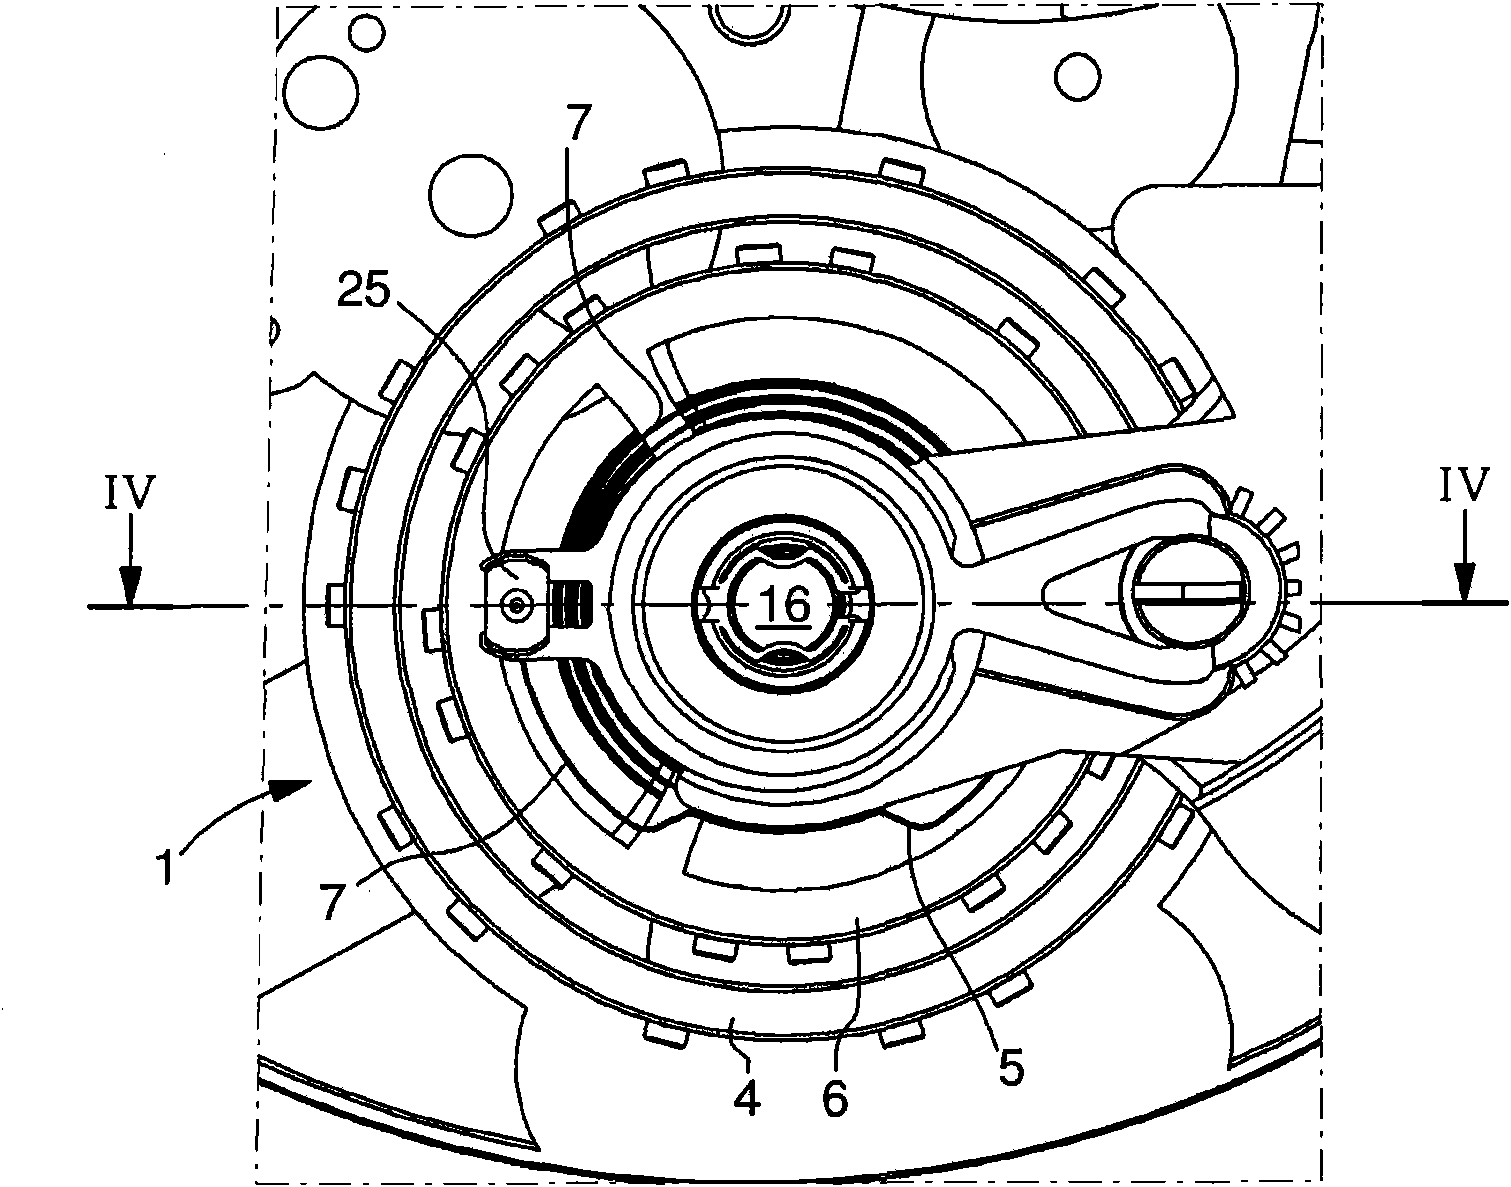 Coupled resonators for timepiece